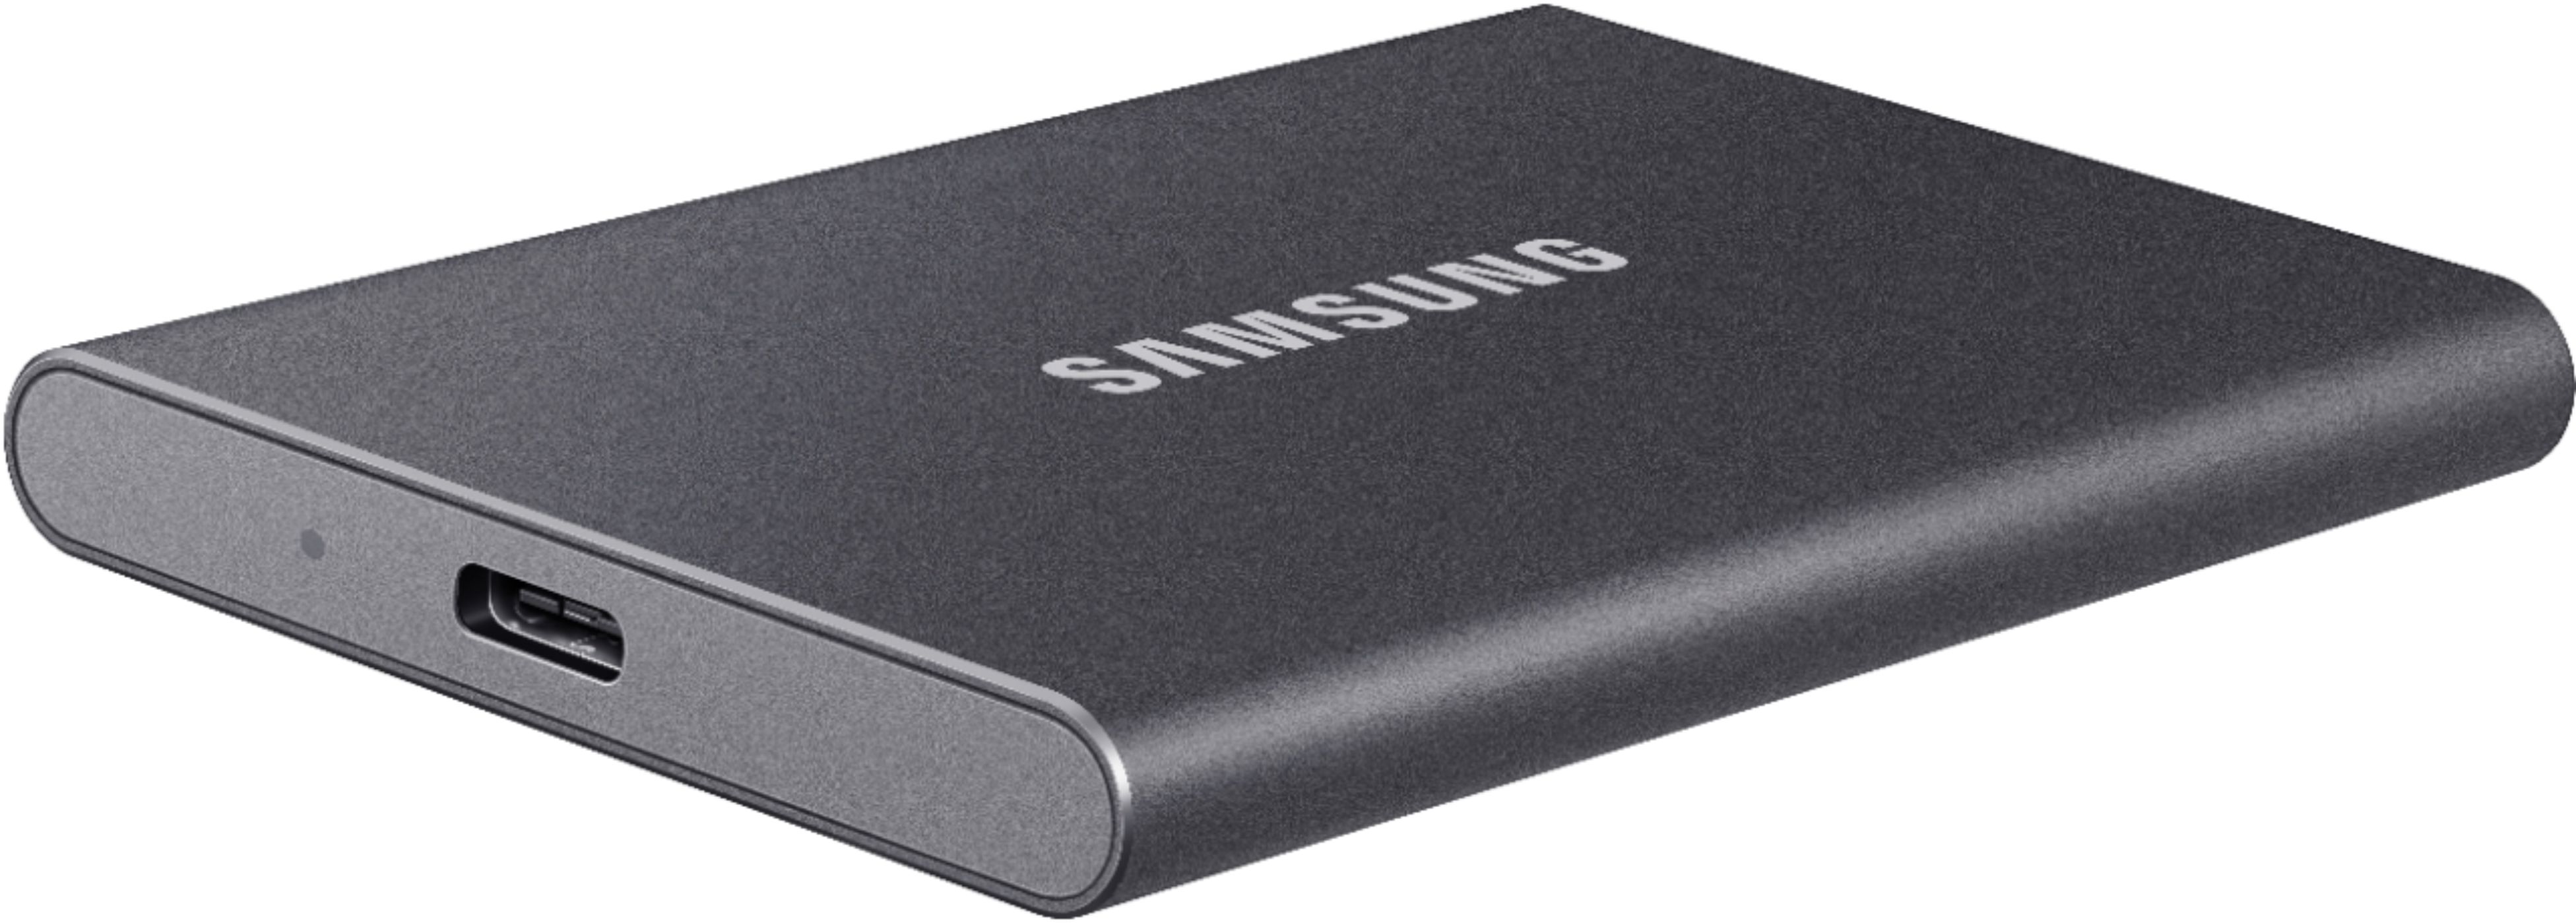 Samsung T7 MU-PC2T0T/WW  Disque SSD externe portable 2 To - USB